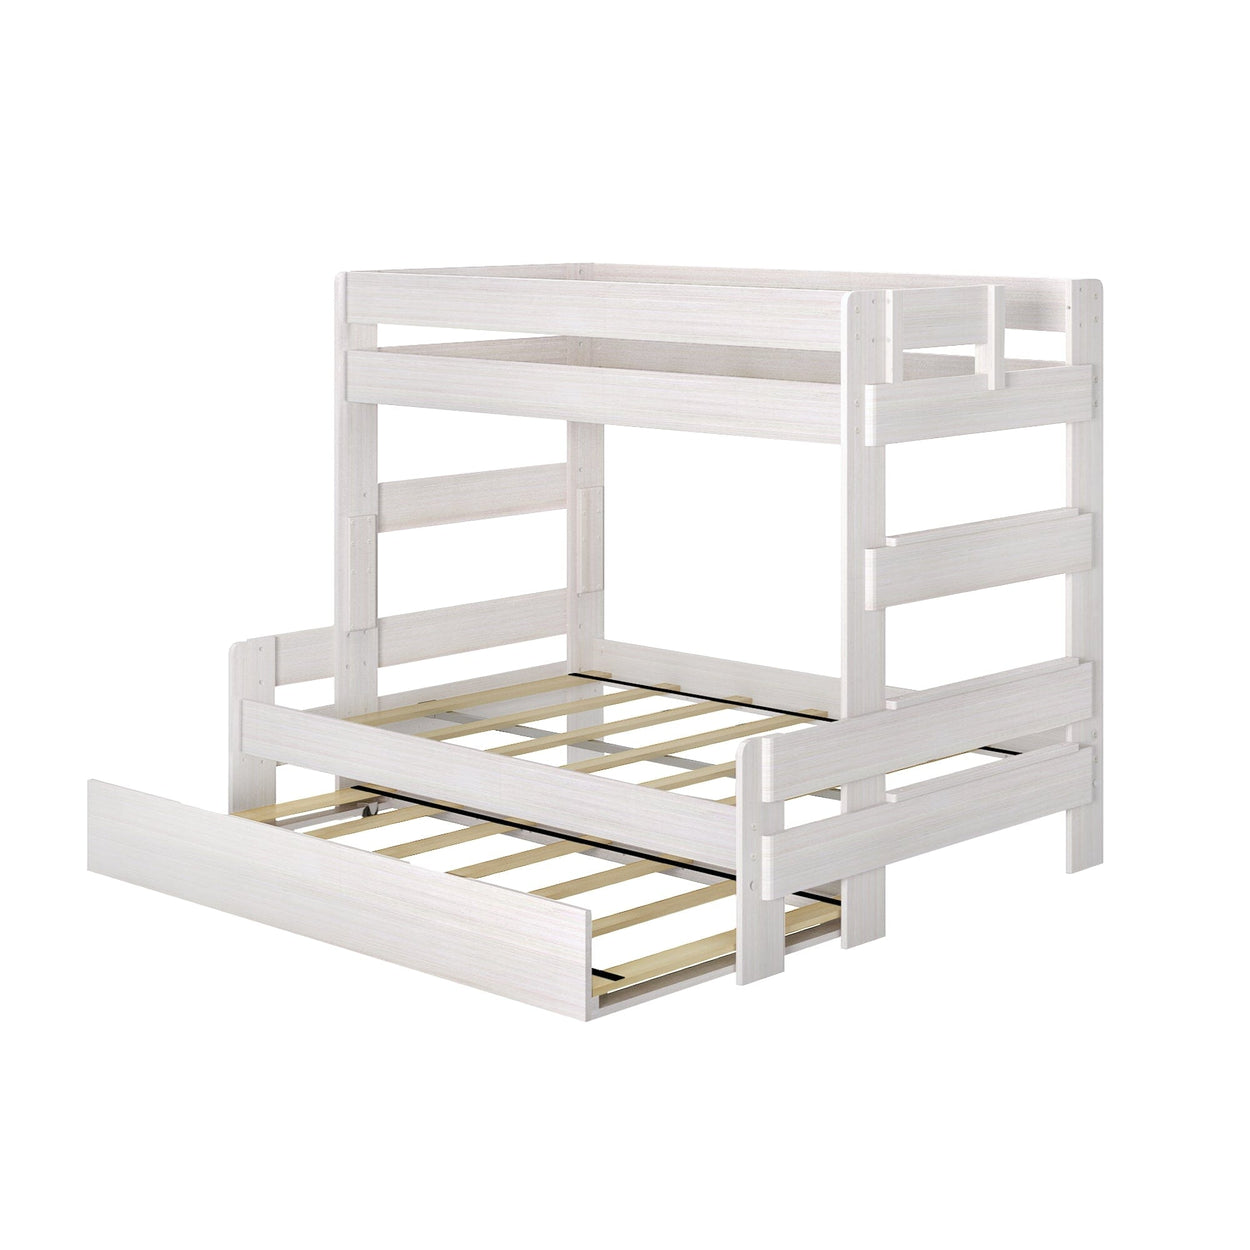 196231-182 : Bunk Beds Farmhouse Twin over Full Bunk Bed with Trundle, White Wash